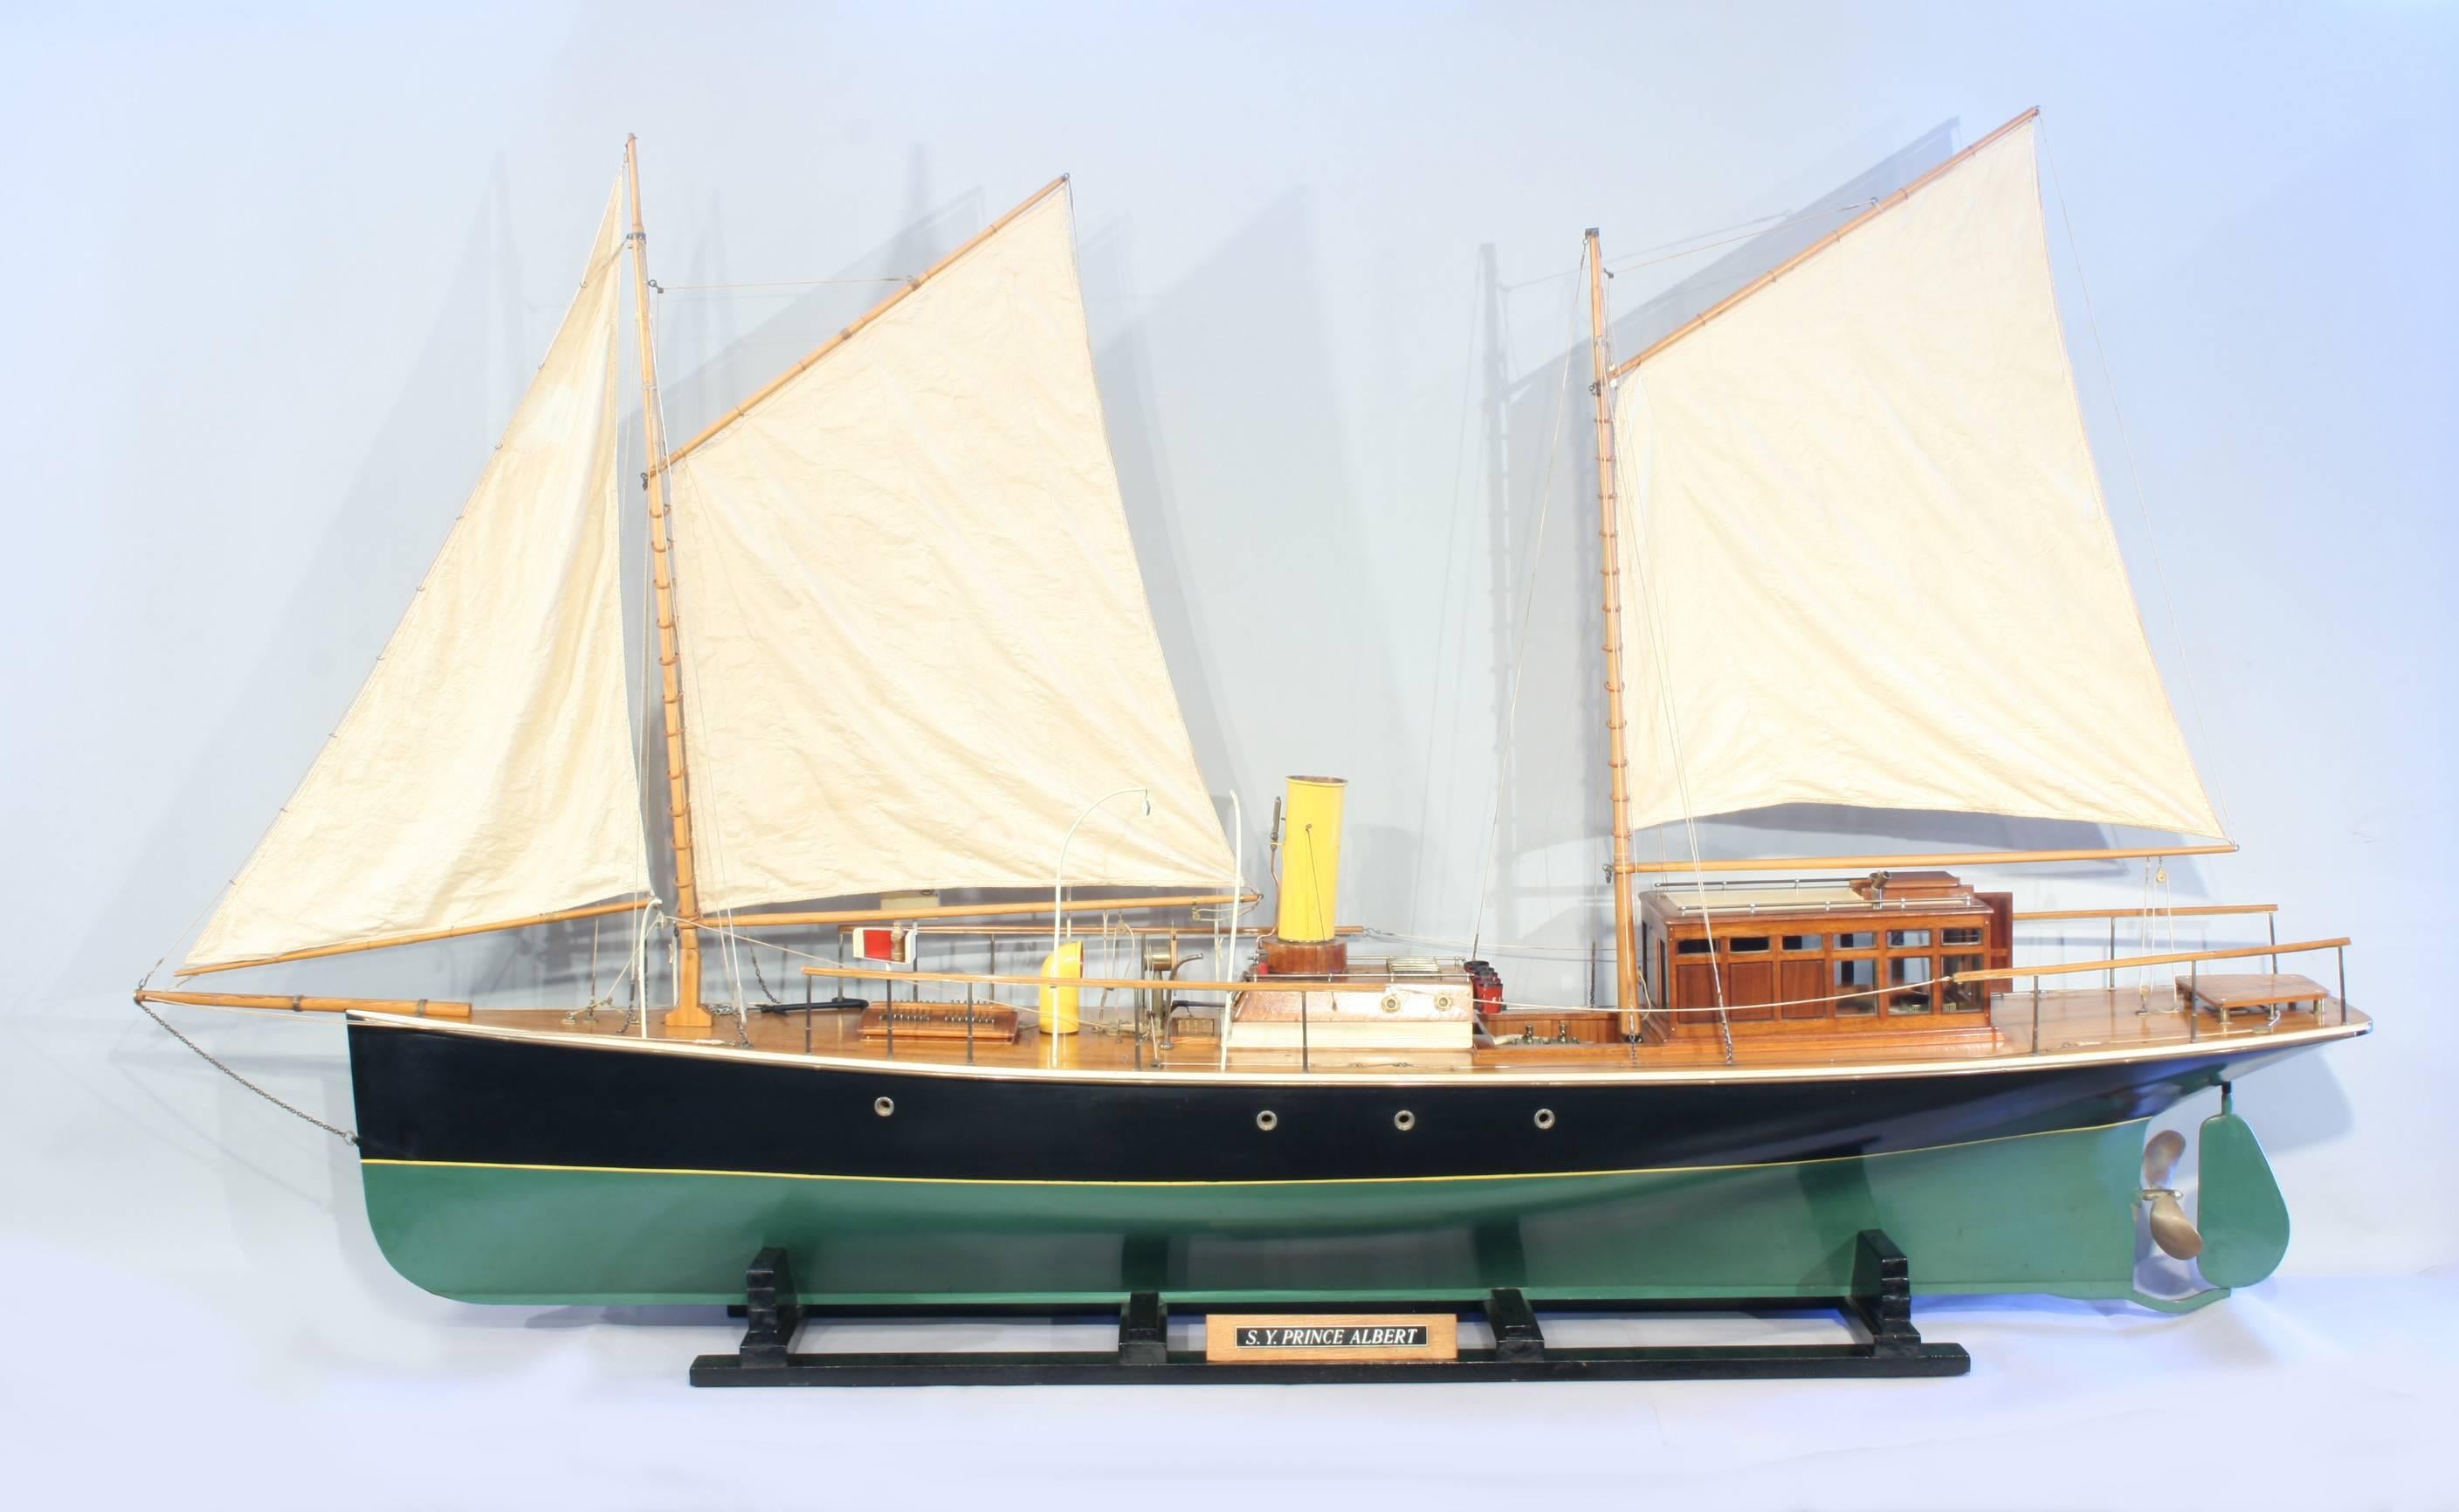 Probably a boat builders model of S.Y. Prince Albert Steam Yacht.
An exceptional museum-quality model of the steam yacht, Prince Albert'. The fine shipbuilder's model is outfitted with a raised paneled mahogany cabin with glazing with working hatch